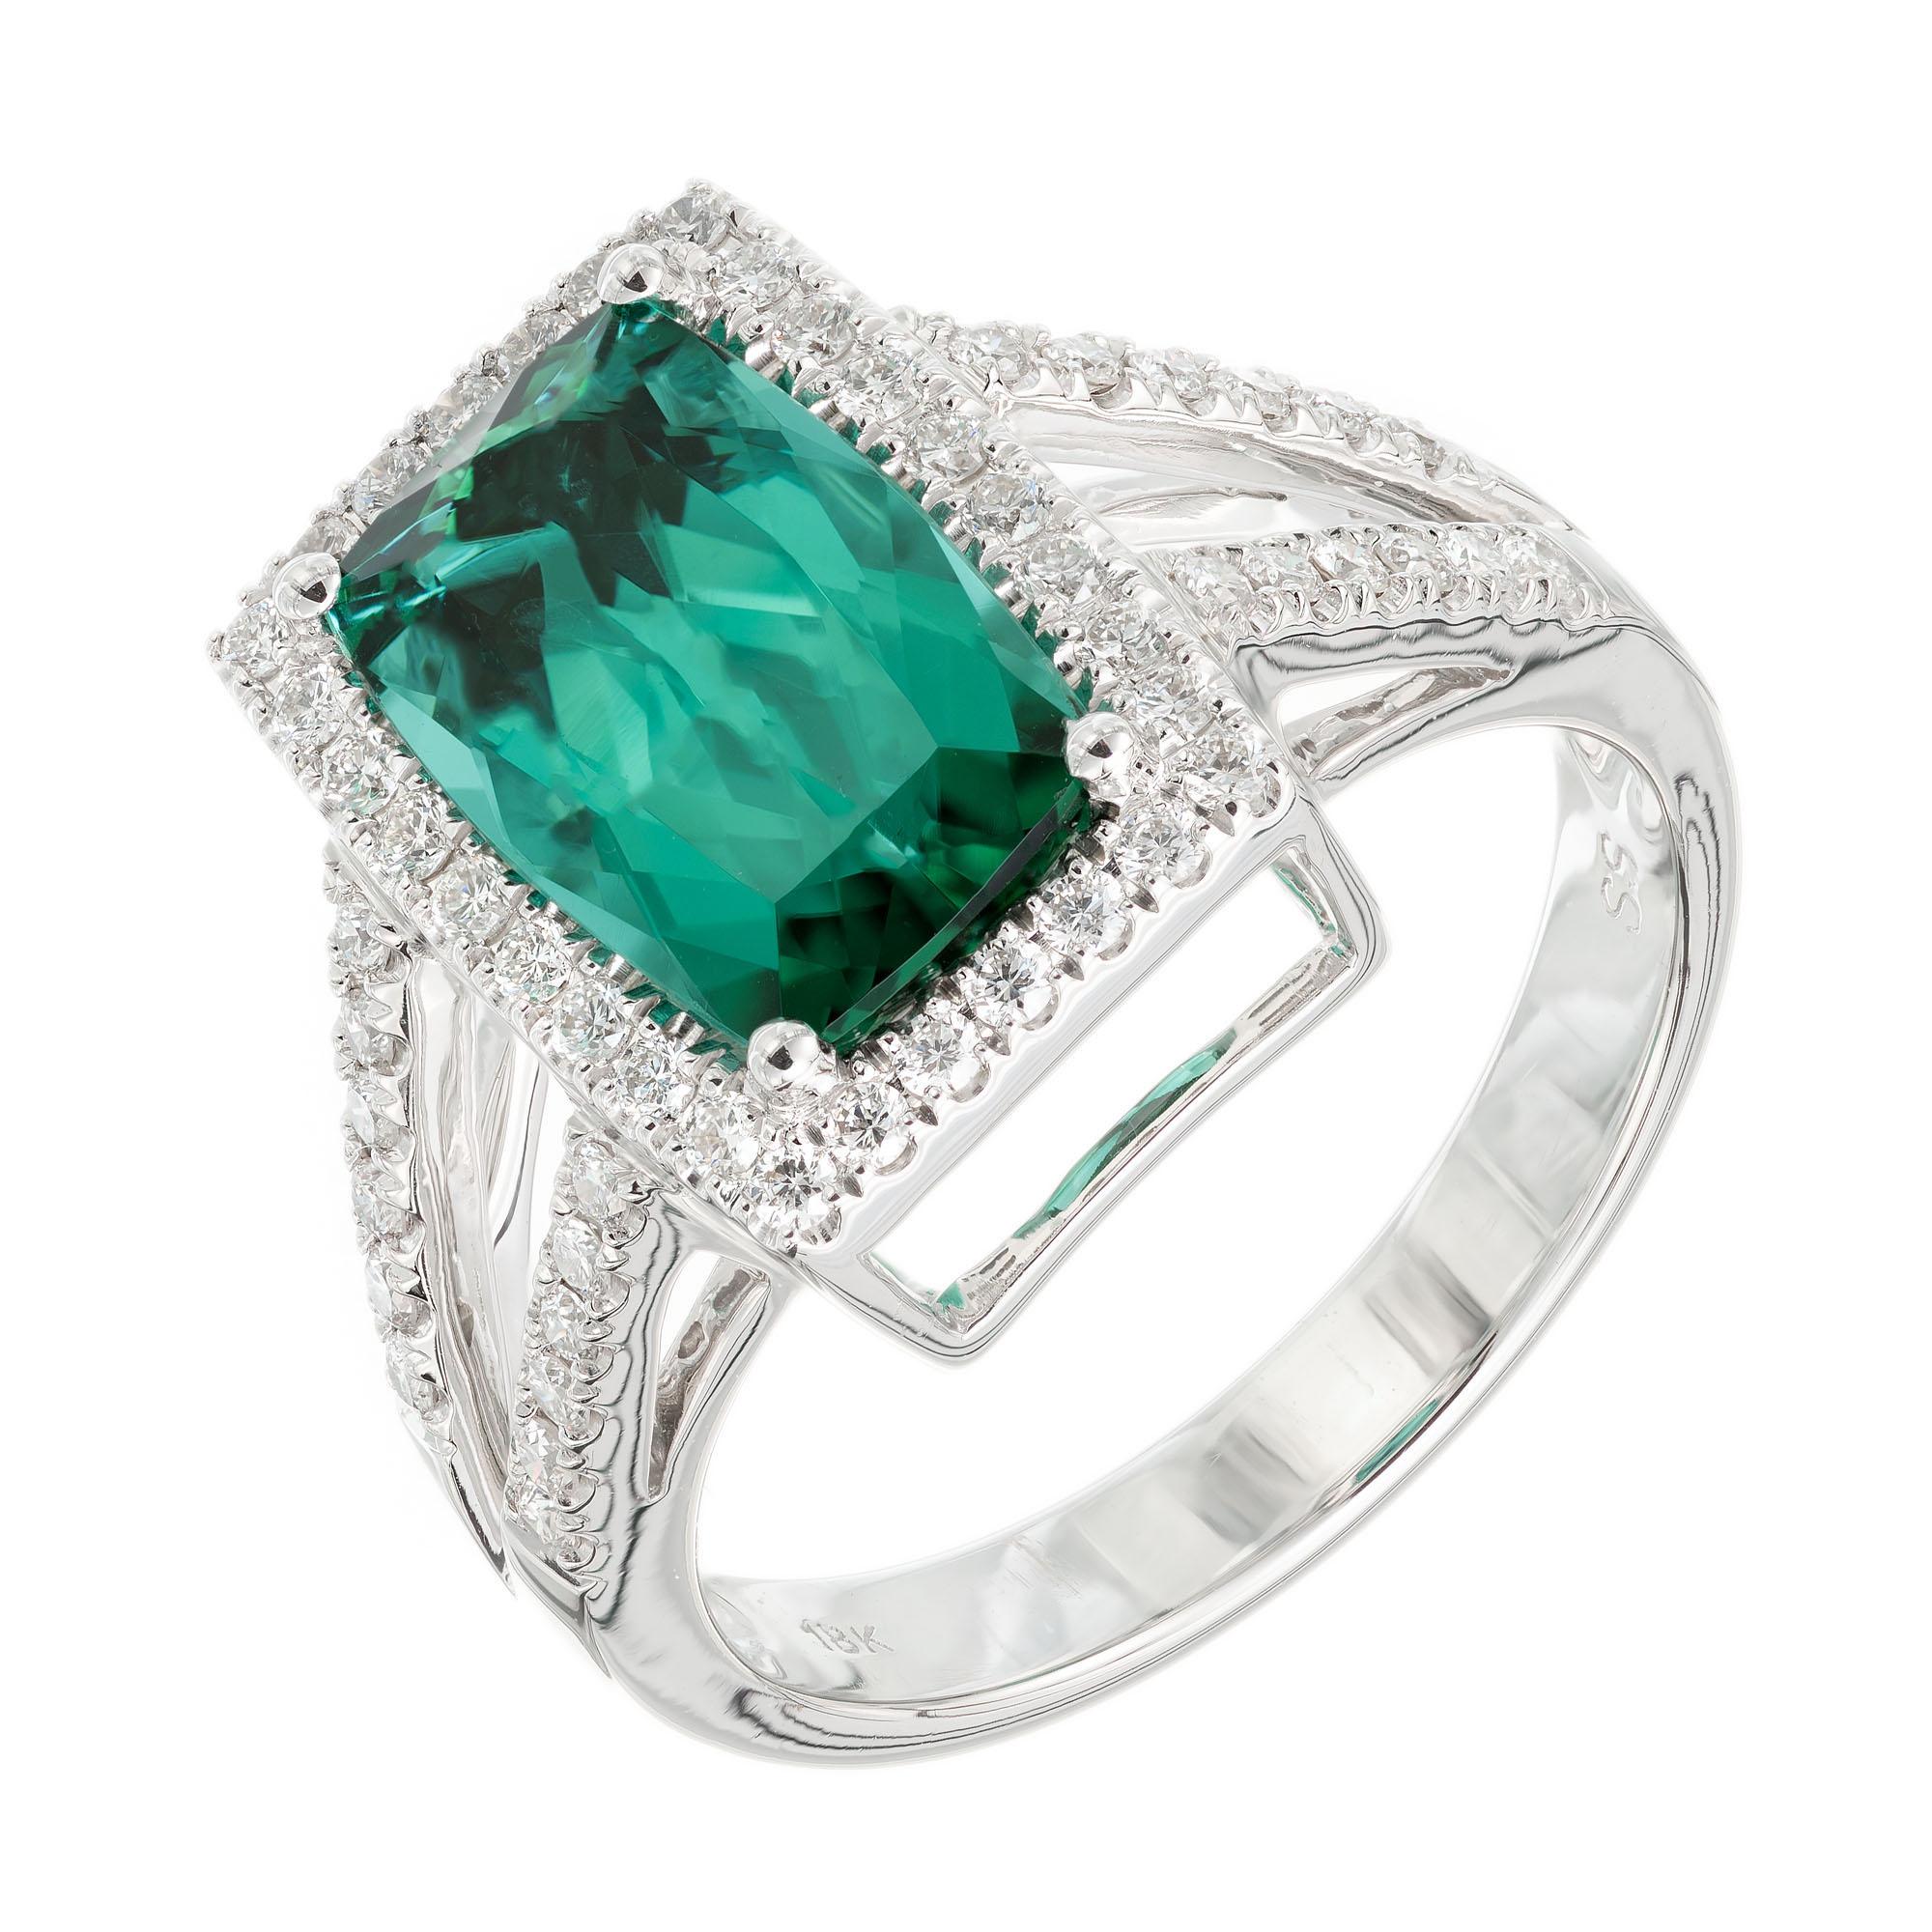 Green tourmaline and diamond cocktail ring. Cushion cut 3.10 carat center stone with a halo of round brilliant cut diamonds in an 18k white gold setting with diamonds along the split shank. Designed and crafted in the Peter Suchy workshop.

1